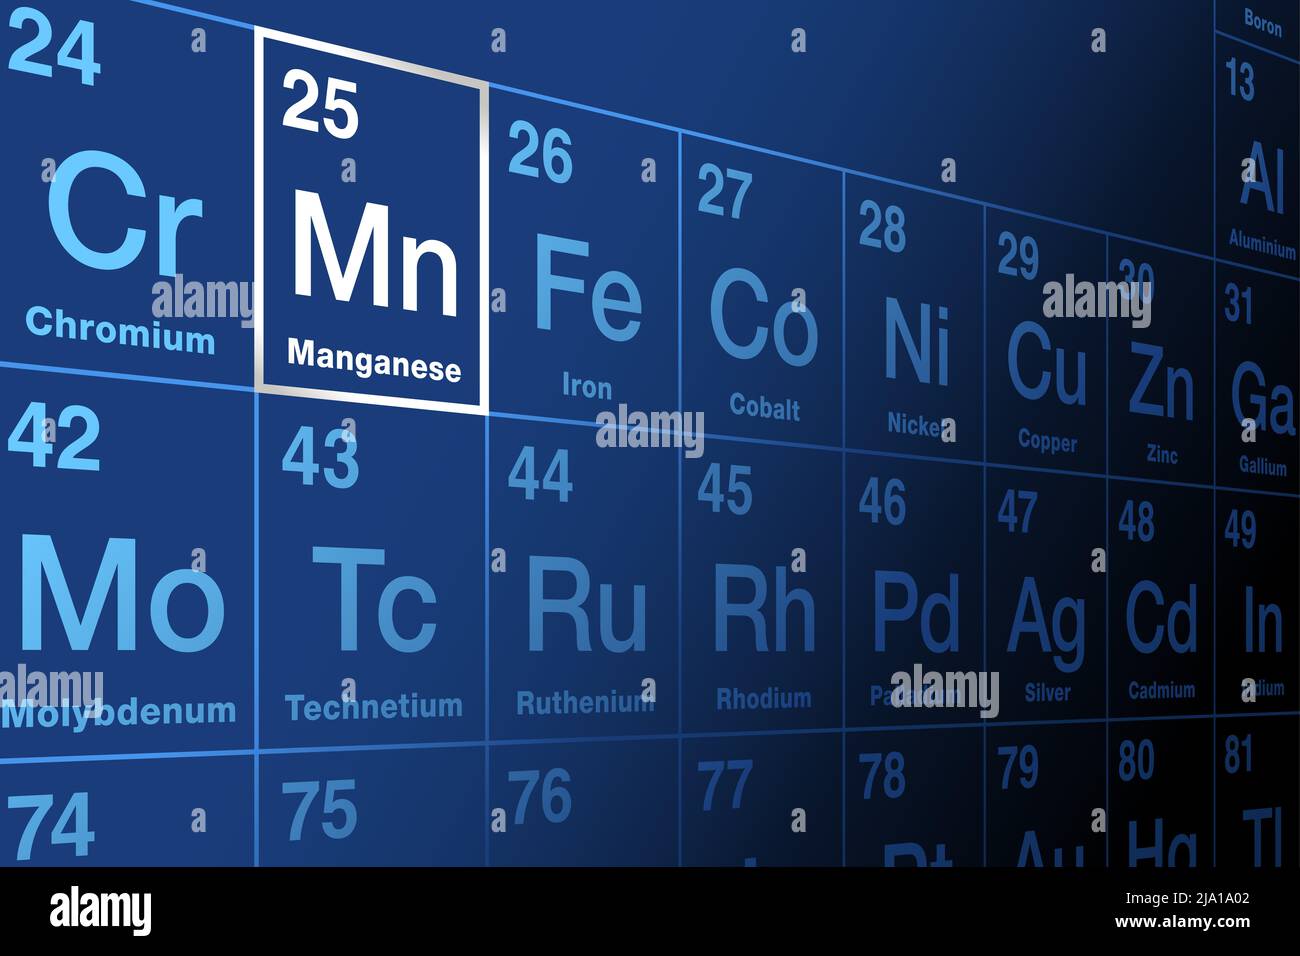 Manganese on periodic table of the elements. Transition metal and chemical element, with symbol Mn and atomic number 25. Used for steel production. Stock Photo